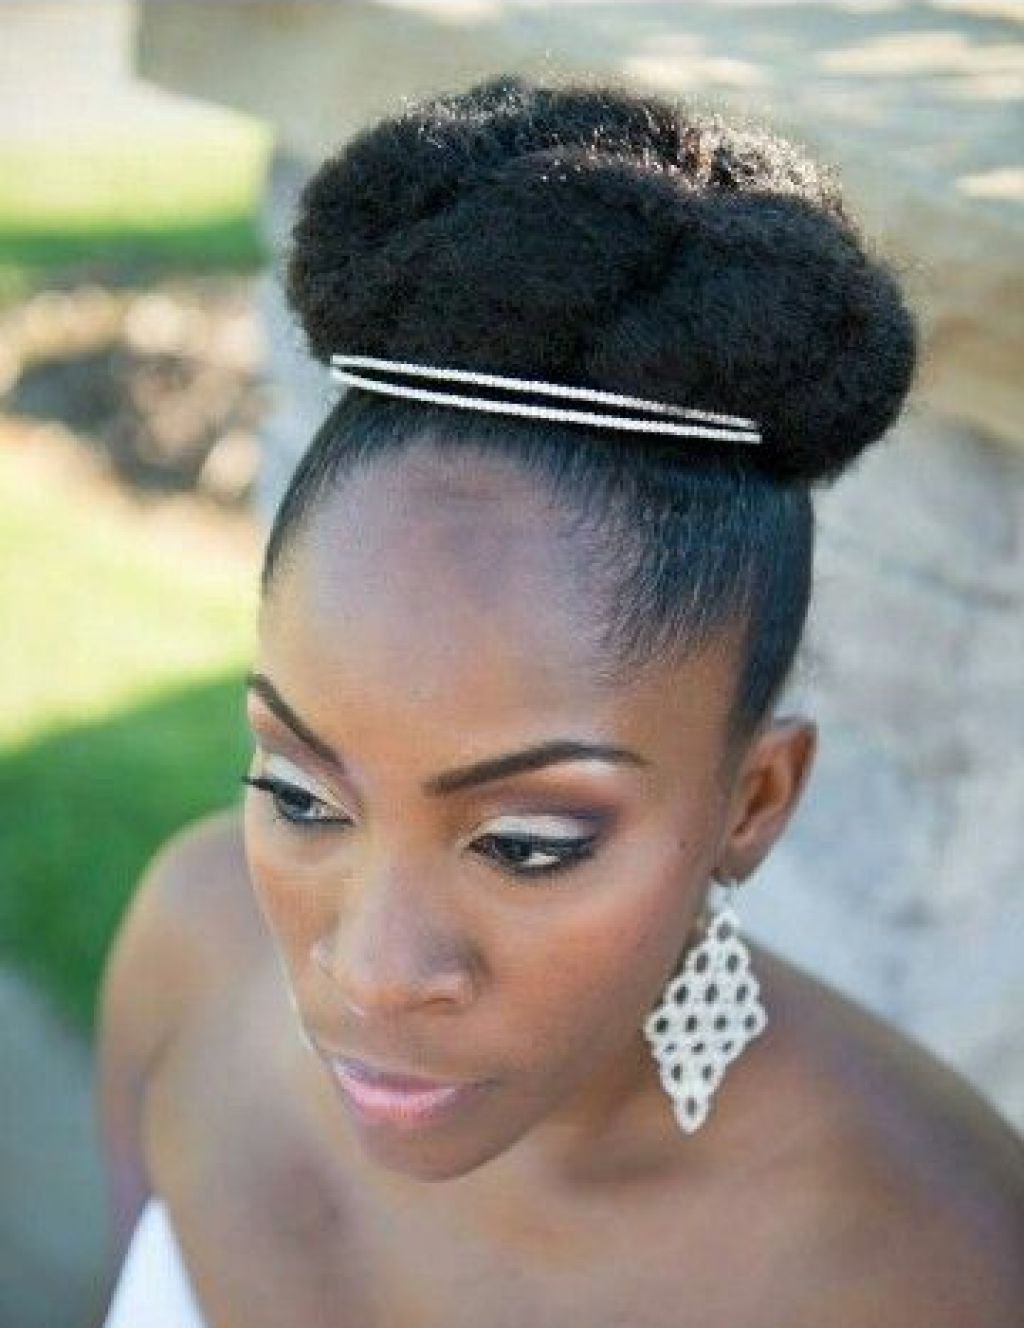 Awesome Black Natural Wedding Hairstyles Gallery – Styles & Ideas Pertaining To Most Popular Wedding Hairstyles For Natural Black Hair (View 13 of 15)